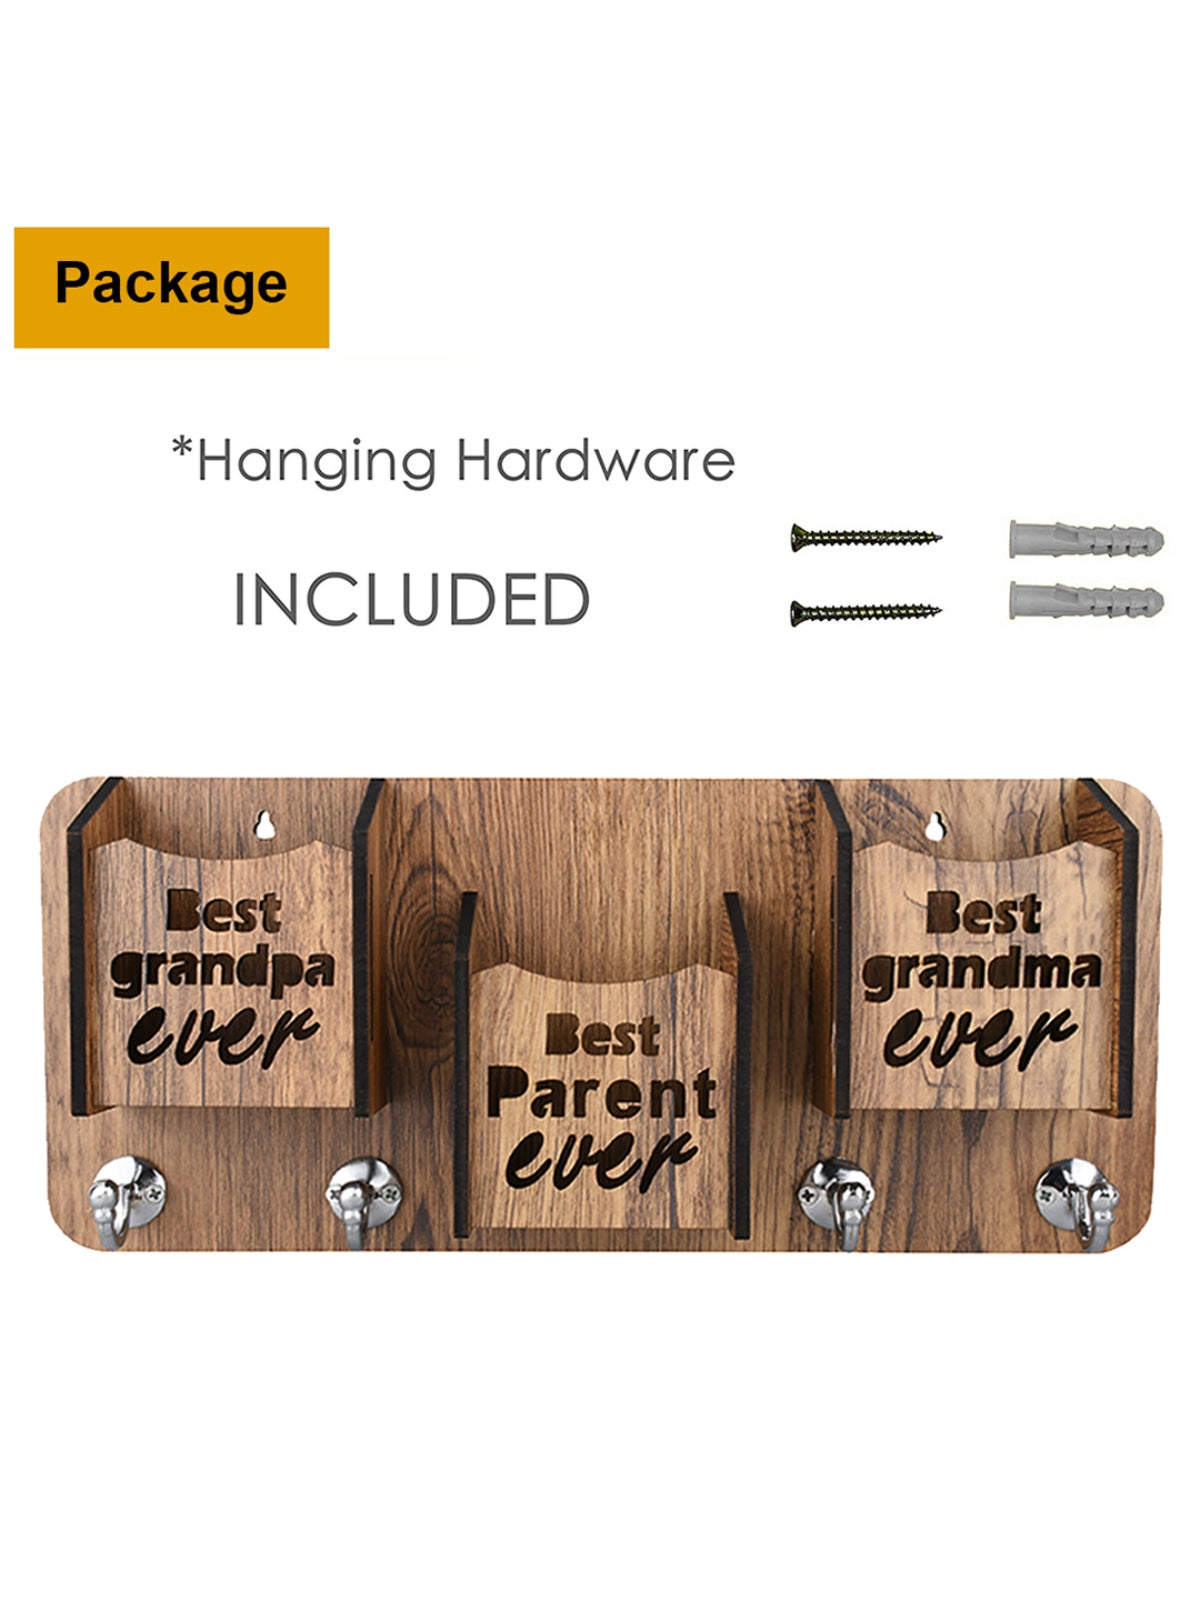 Wooden Key Holder With 3 Mobile Stand Holder For Home & Office Wall Decorative